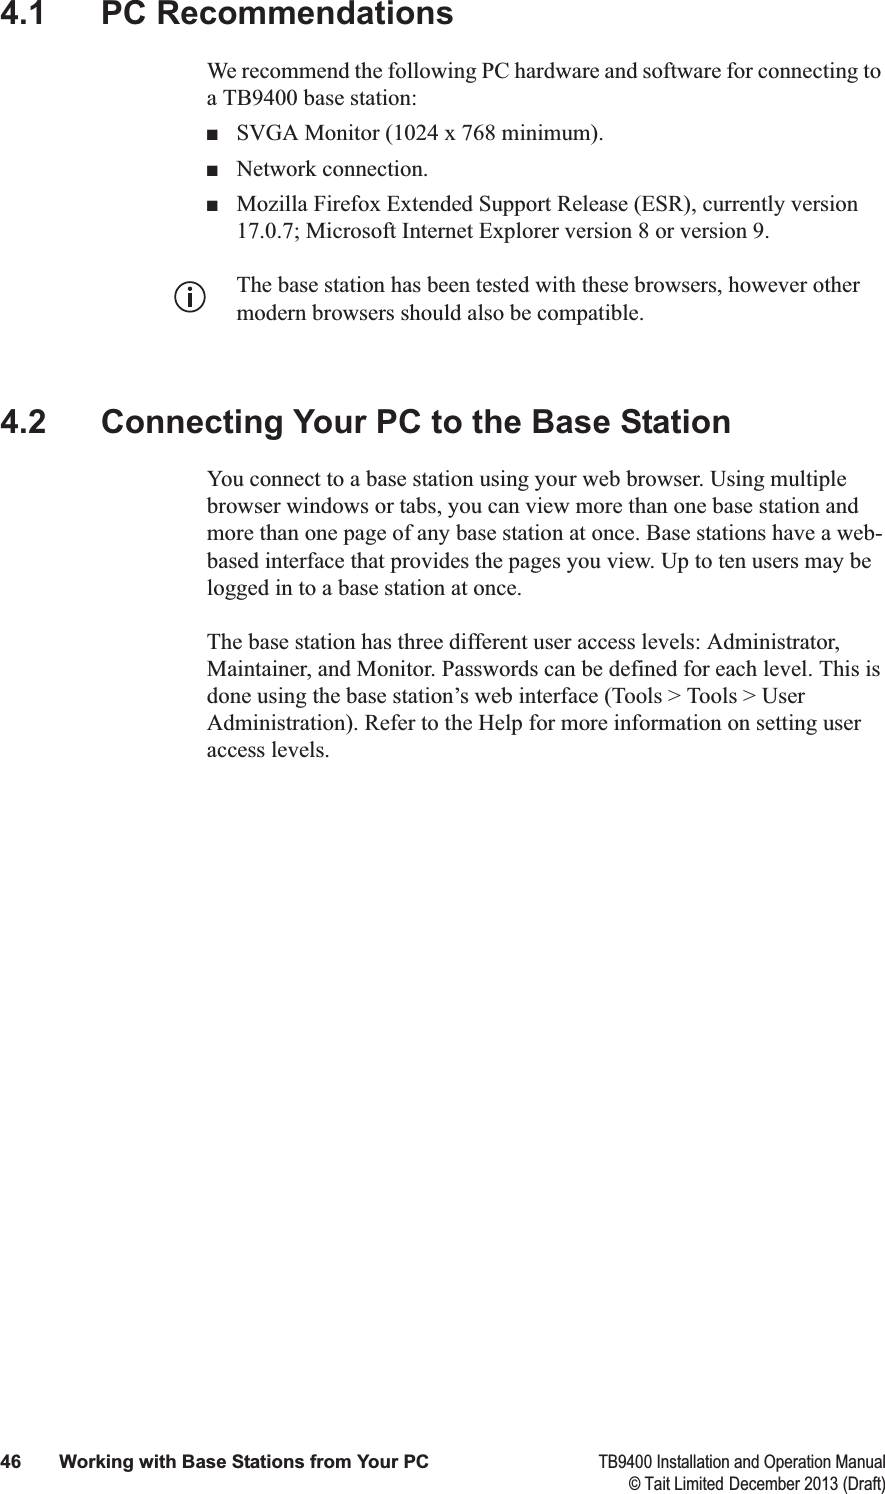  46 Working with Base Stations from Your PC TB9400 Installation and Operation Manual© Tait Limited December 2013 (Draft)4.1 PC RecommendationsWe recommend the following PC hardware and software for connecting to a TB9400 base station:■SVGA Monitor (1024 x 768 minimum).■Network connection.■Mozilla Firefox Extended Support Release (ESR), currently version 17.0.7; Microsoft Internet Explorer version 8 or version 9. The base station has been tested with these browsers, however other modern browsers should also be compatible. 4.2 Connecting Your PC to the Base StationYou connect to a base station using your web browser. Using multiple browser windows or tabs, you can view more than one base station and more than one page of any base station at once. Base stations have a web-based interface that provides the pages you view. Up to ten users may be logged in to a base station at once.The base station has three different user access levels: Administrator, Maintainer, and Monitor. Passwords can be defined for each level. This is done using the base station’s web interface (Tools &gt; Tools &gt; User Administration). Refer to the Help for more information on setting user access levels.